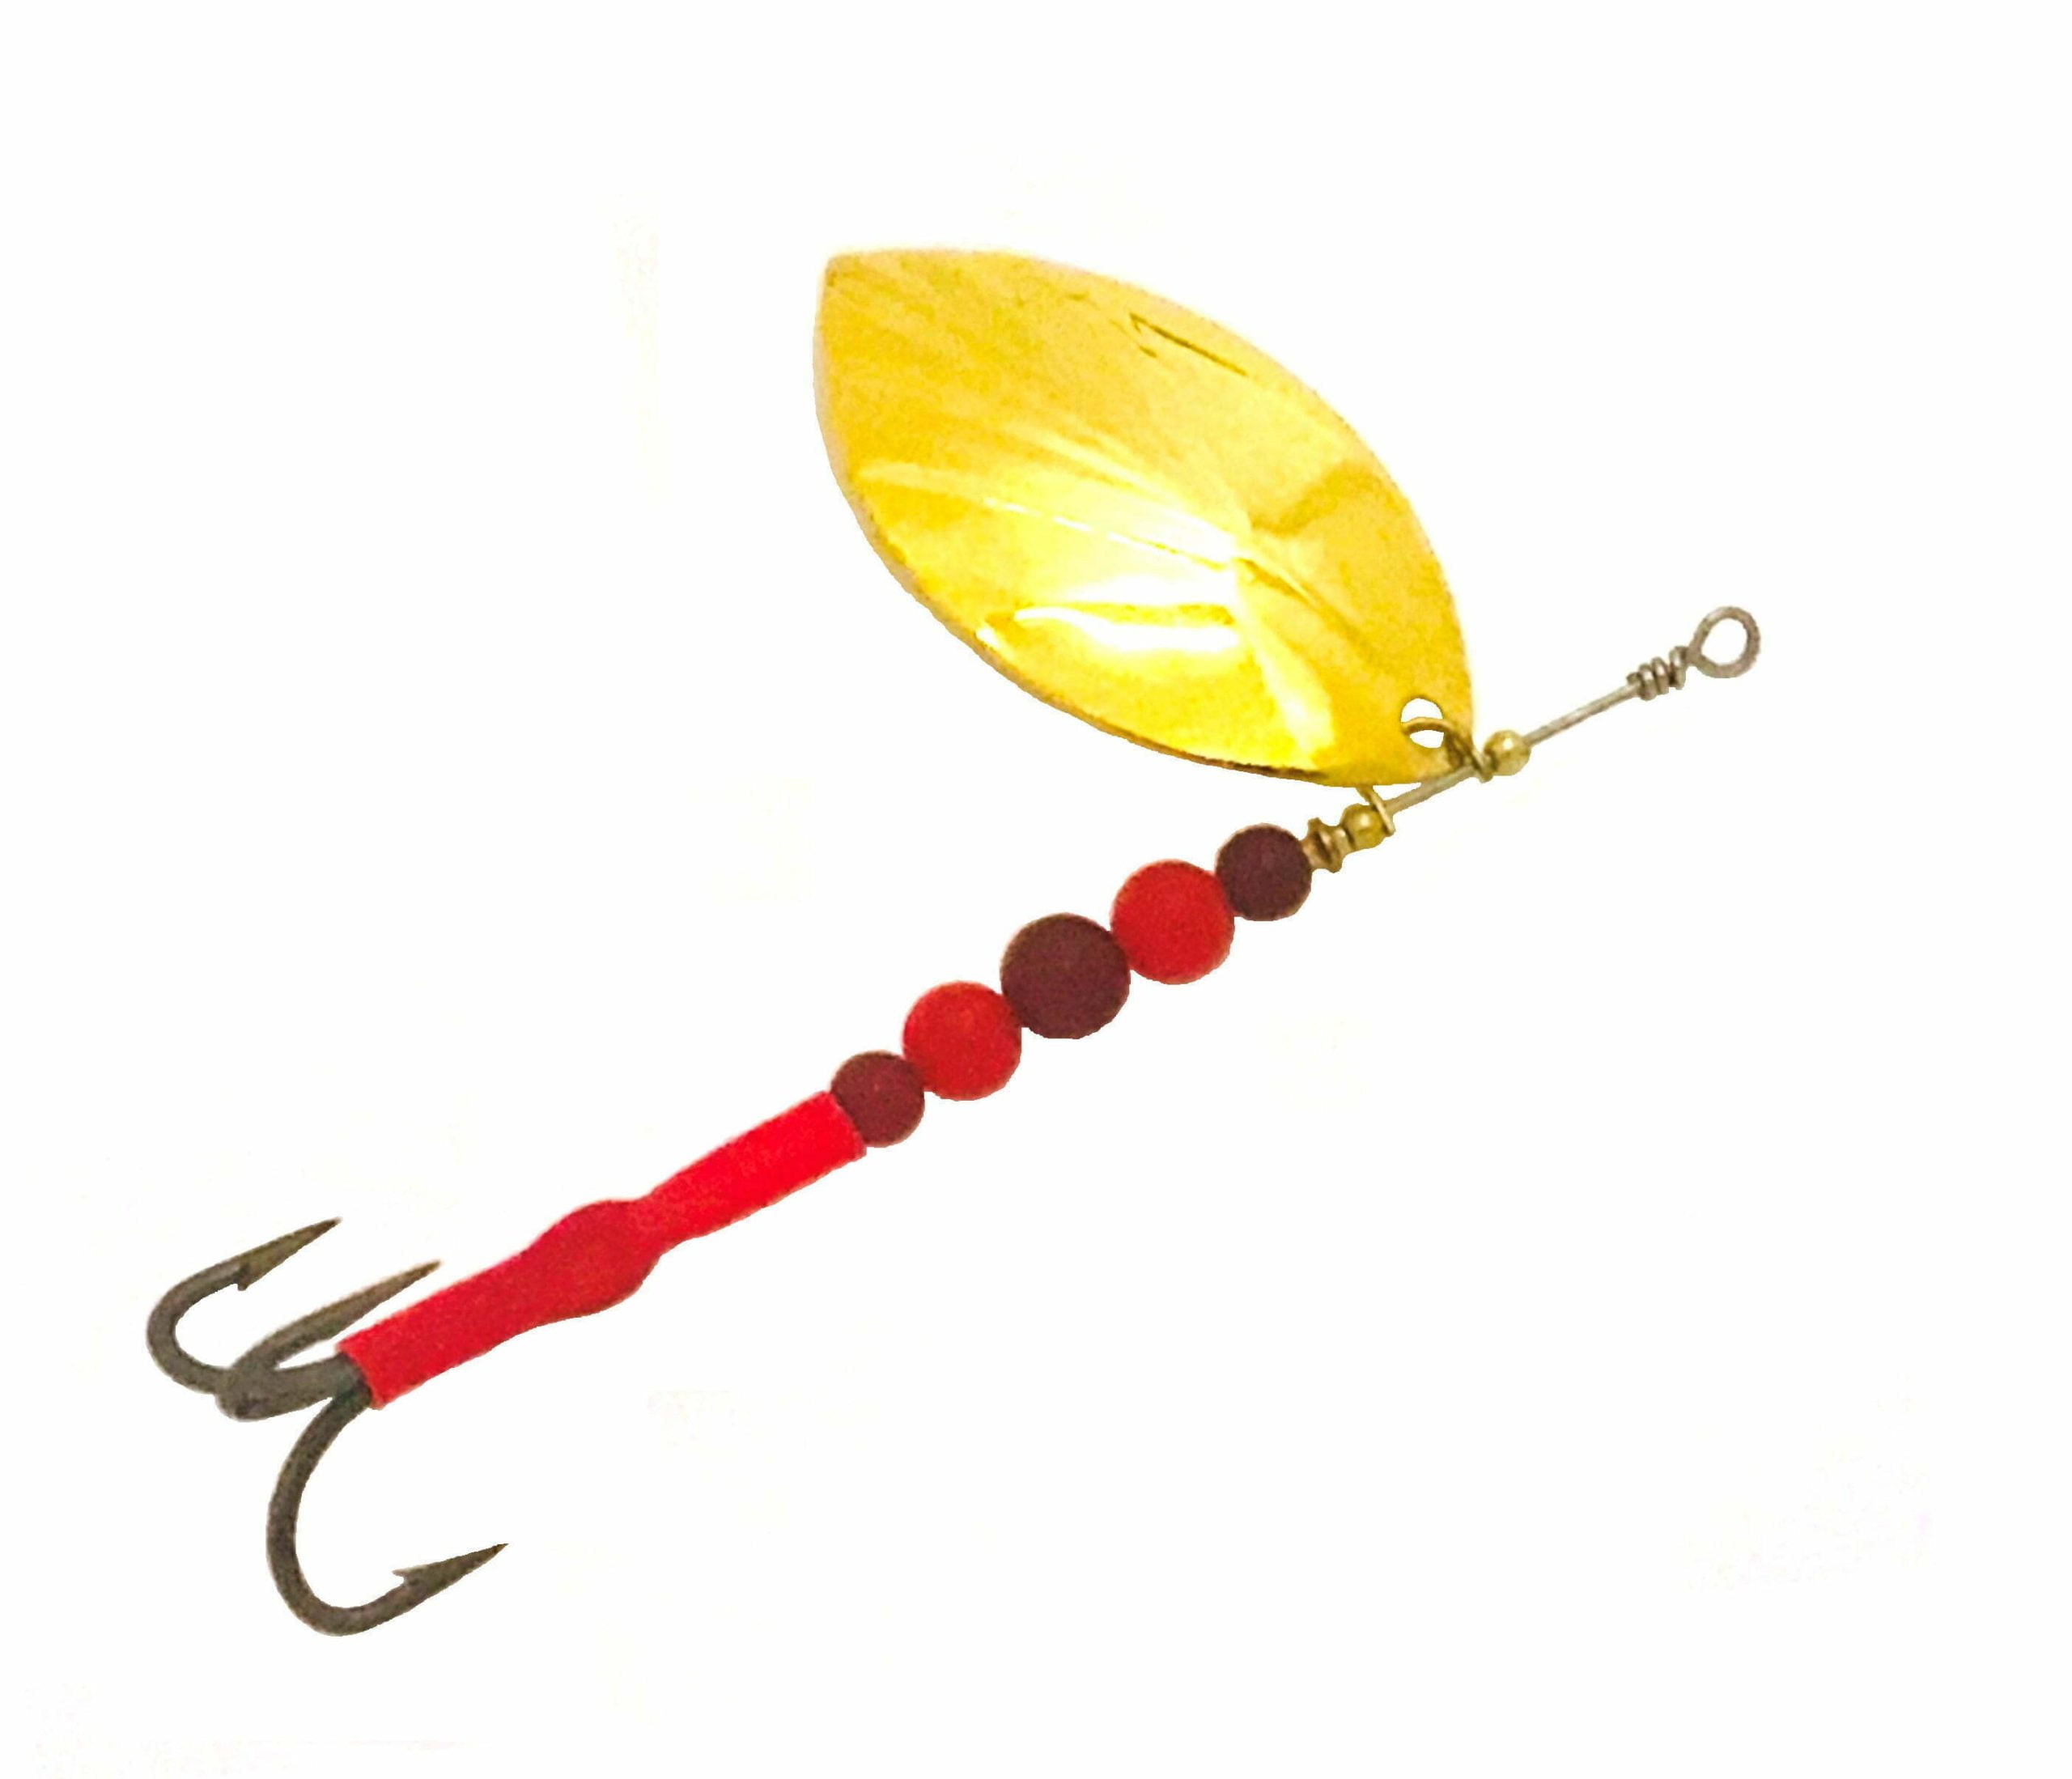 https://stonecoldbeads.com/wp-content/uploads/2019/02/Dirty-Troll-Dead-fish-red-Trolling-Spinner-with-VMC-Treble-Hook-scaled.jpg